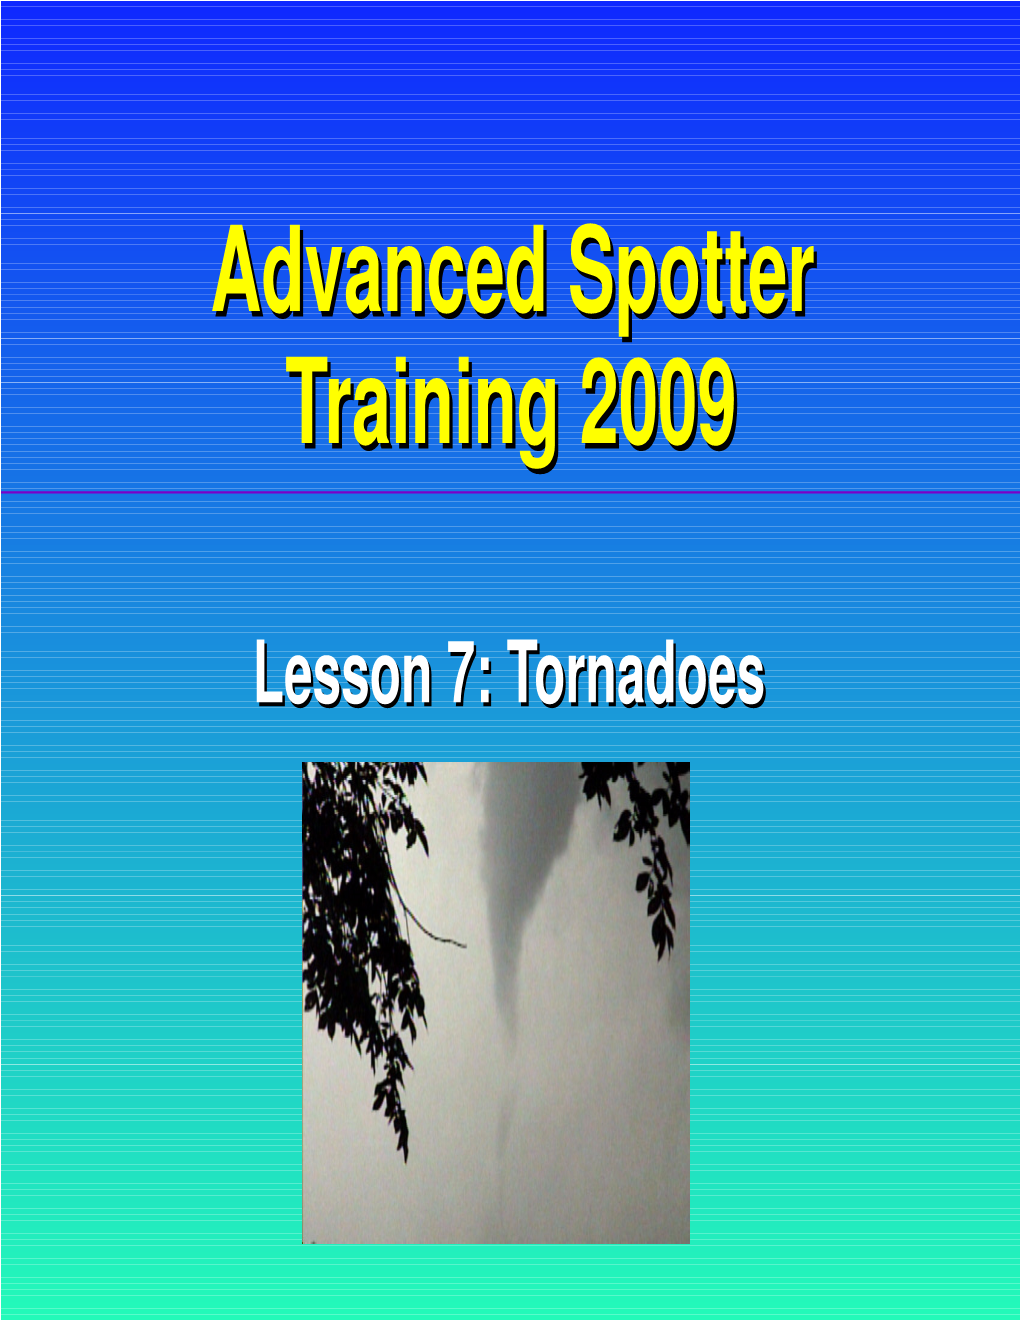 Lesson 7: Tornadoes